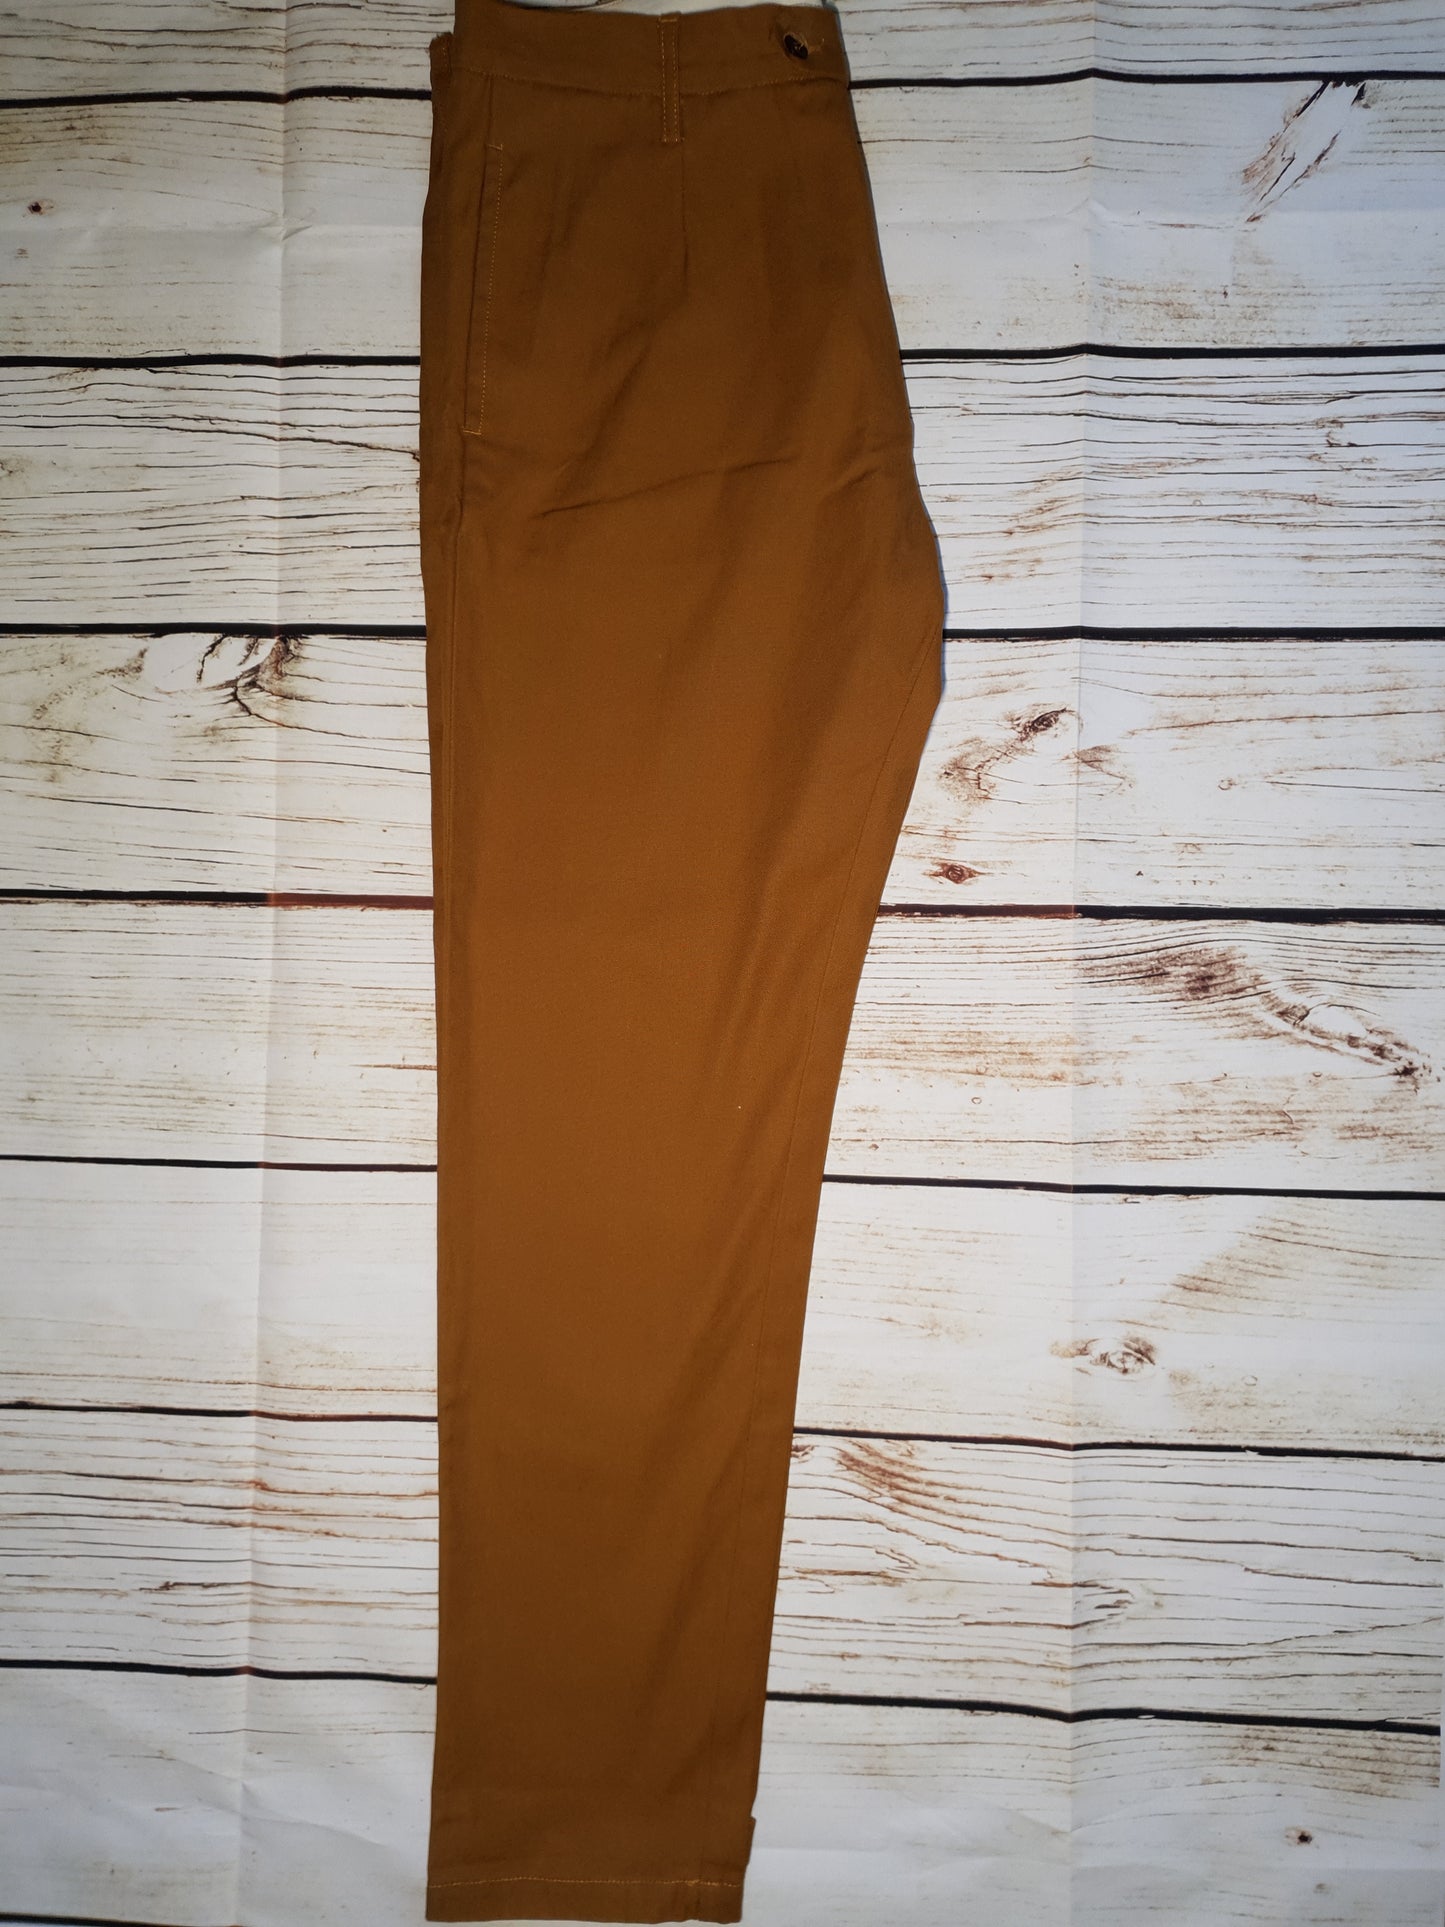 Replay Tan One Off II Yeldun Evolution Mens Cotton Canvas Jeans W33" L31" RRP £210 Timeless Fashions